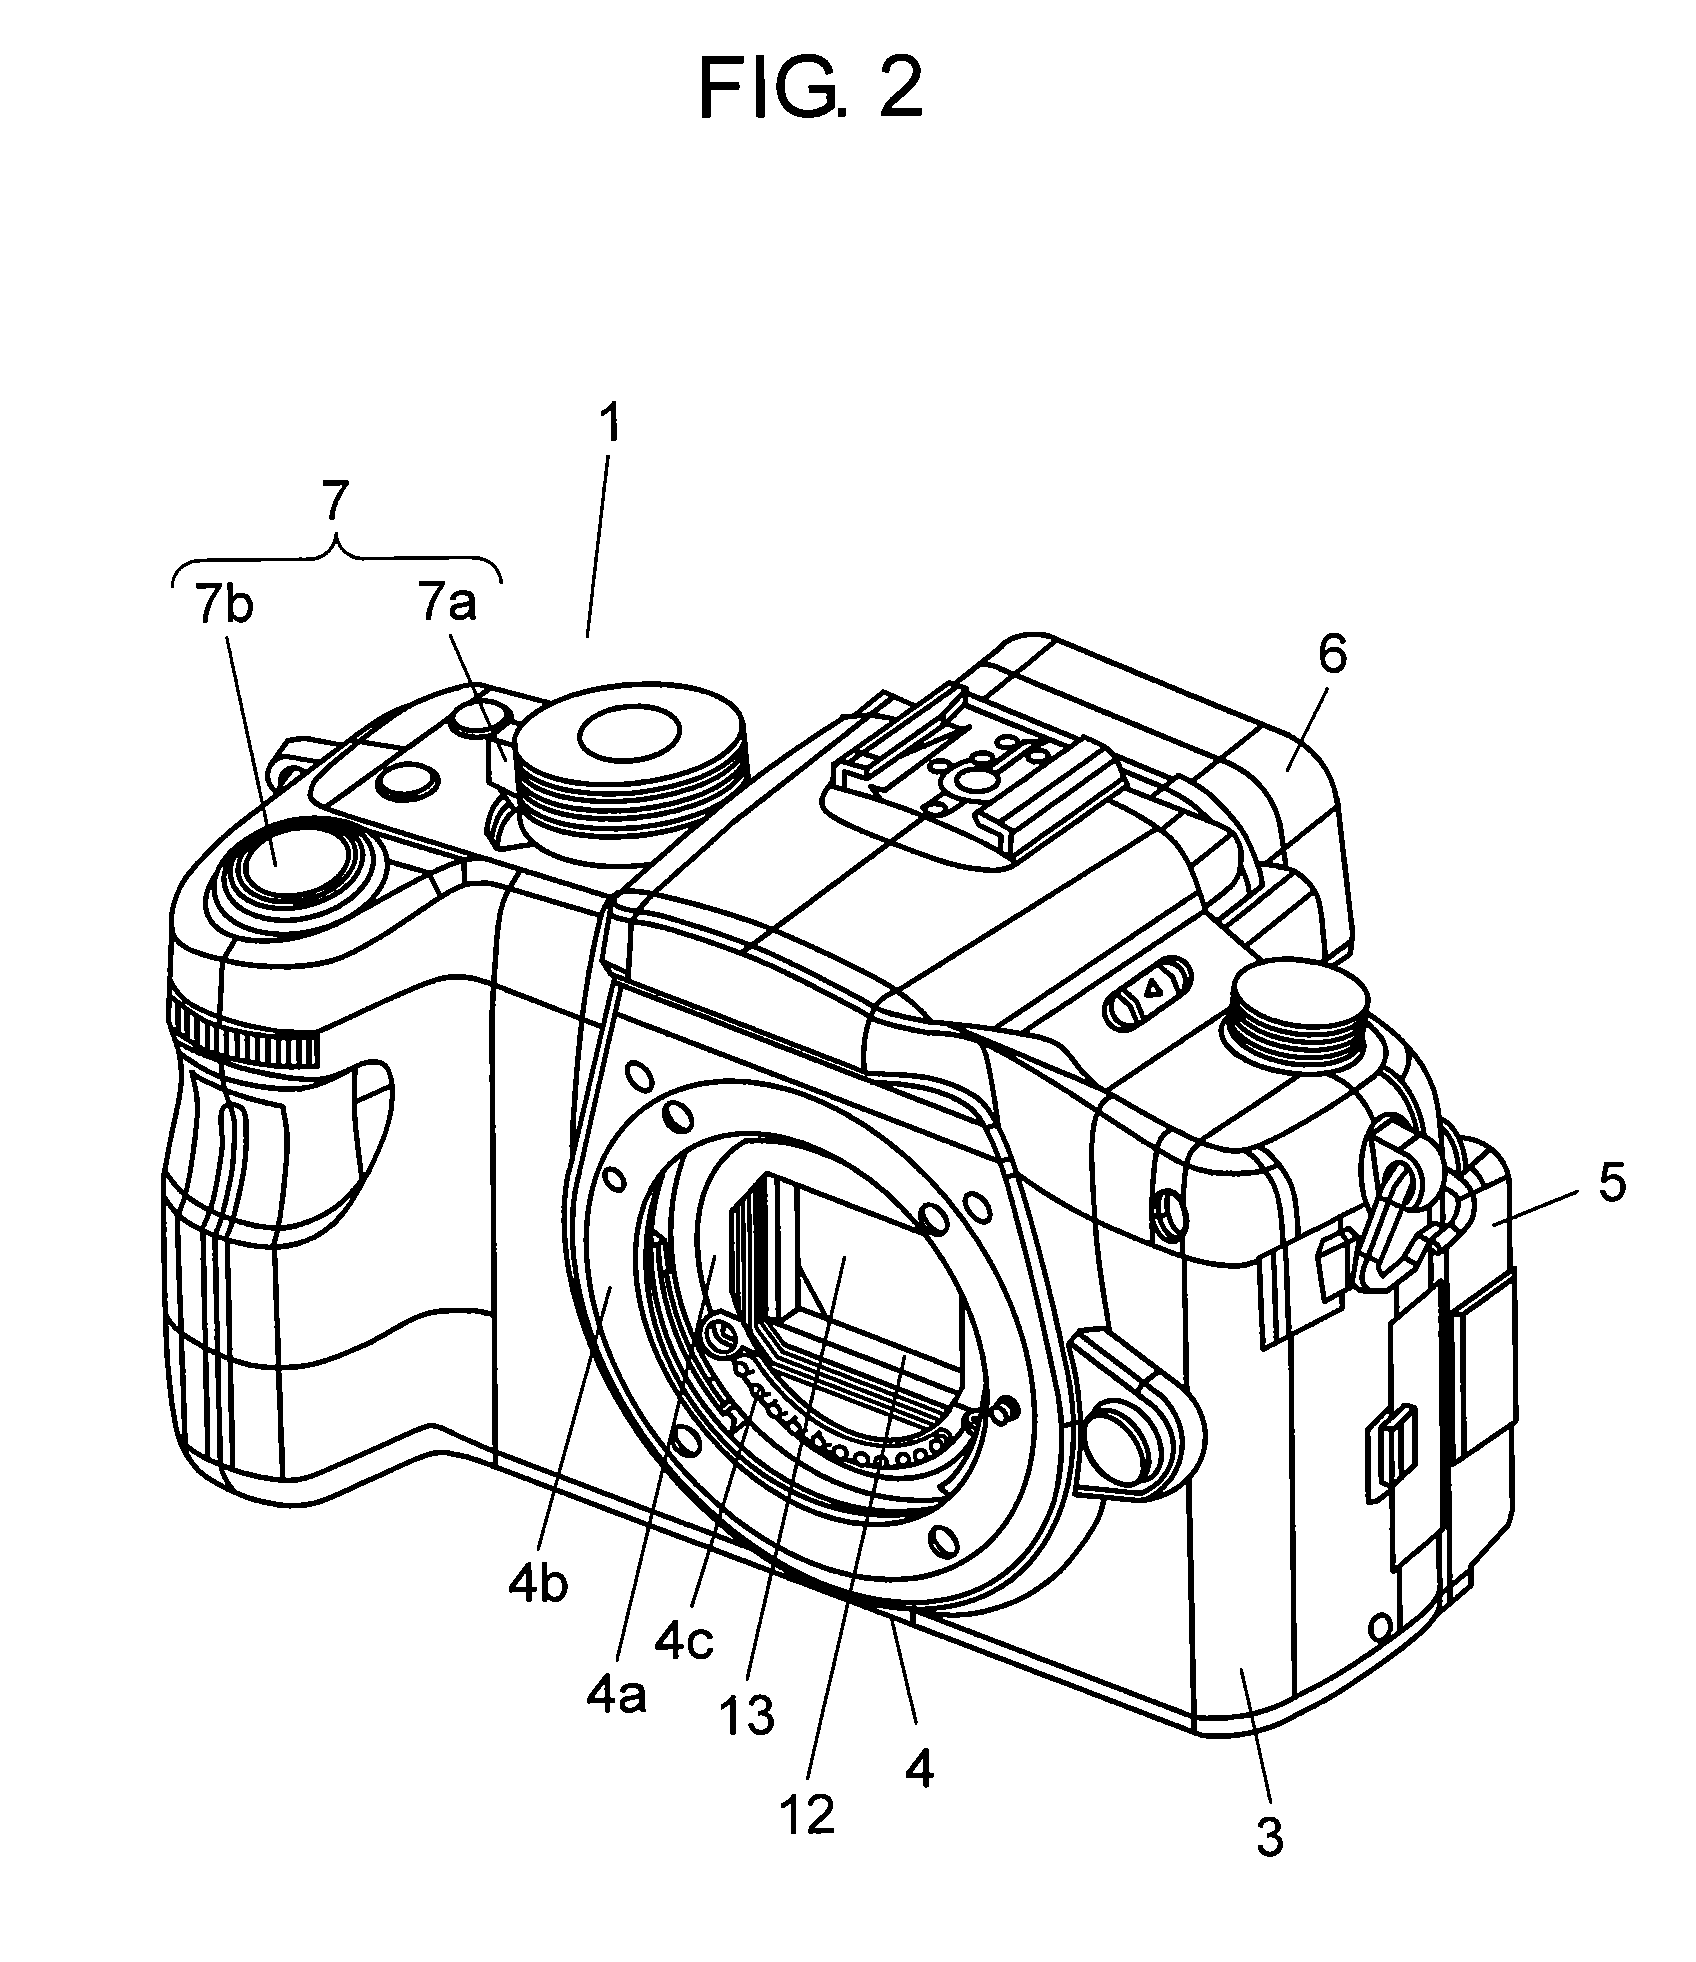 Digital camera and interchangeable lens unit